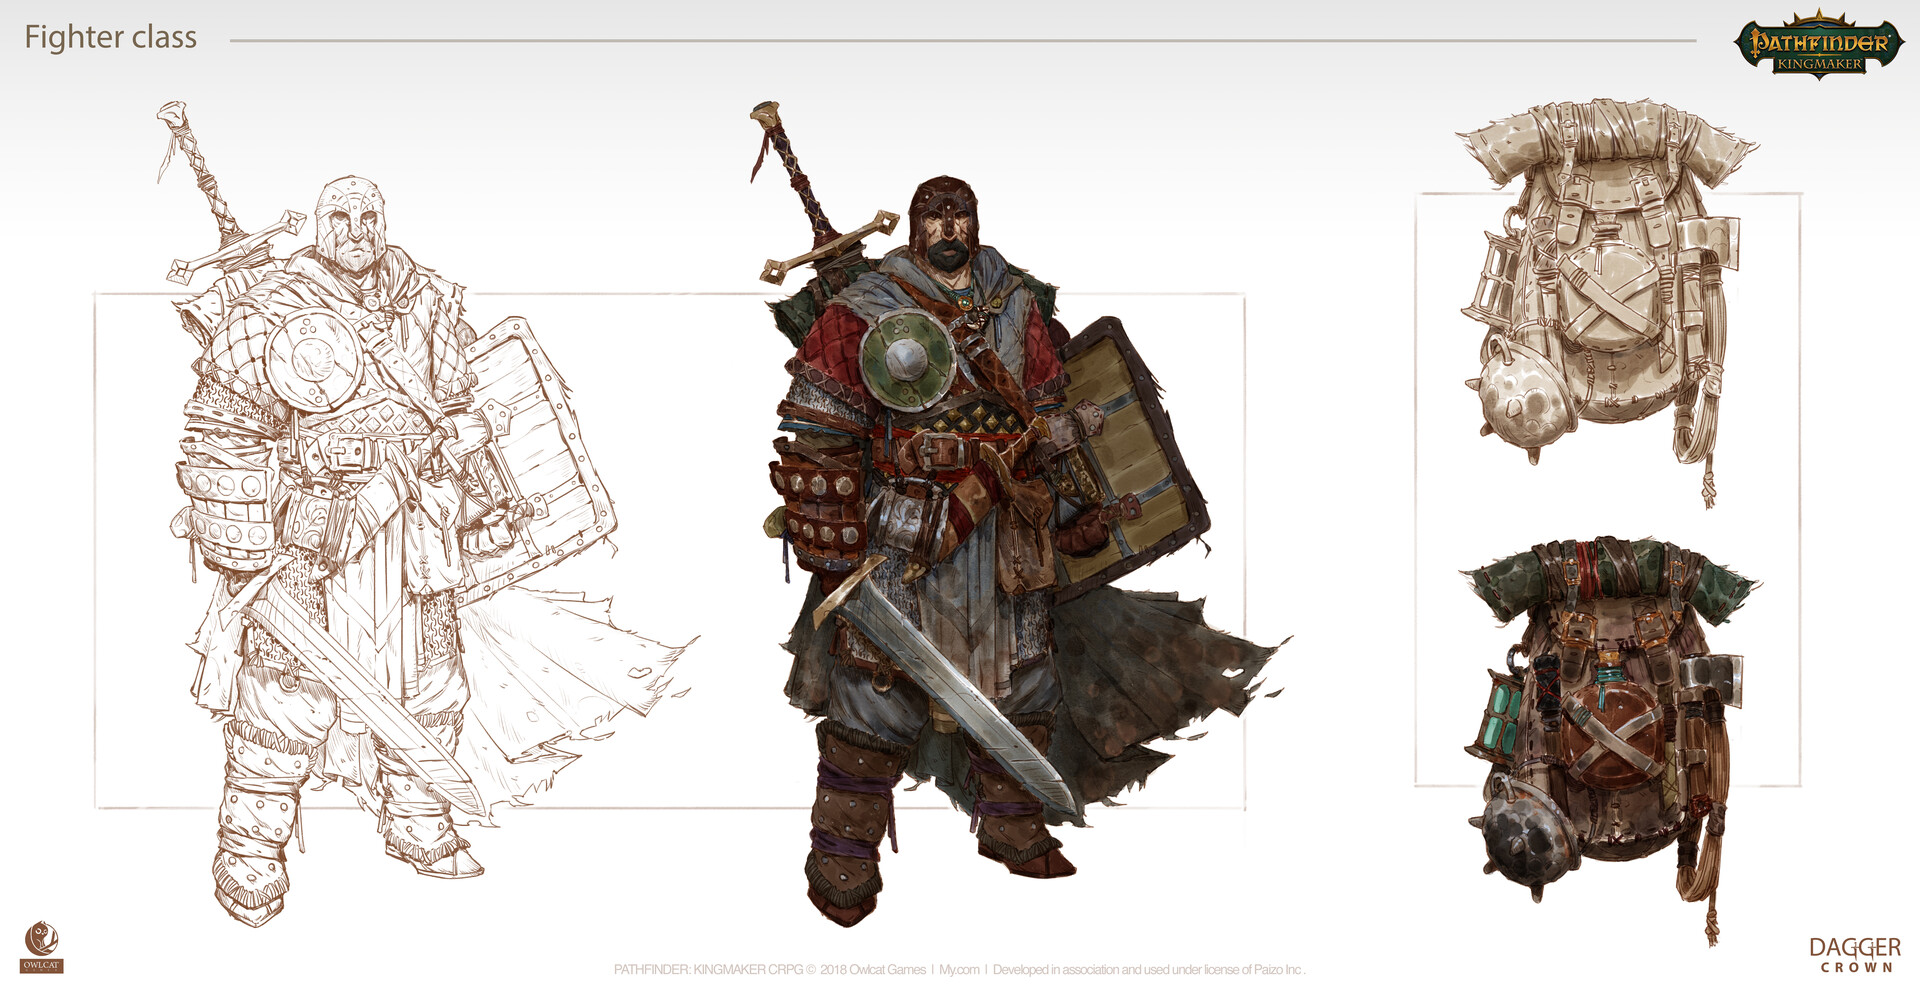 Visual presentation of clippings of fighter's outfit with several weapons :  r/Pathfinder_Kingmaker